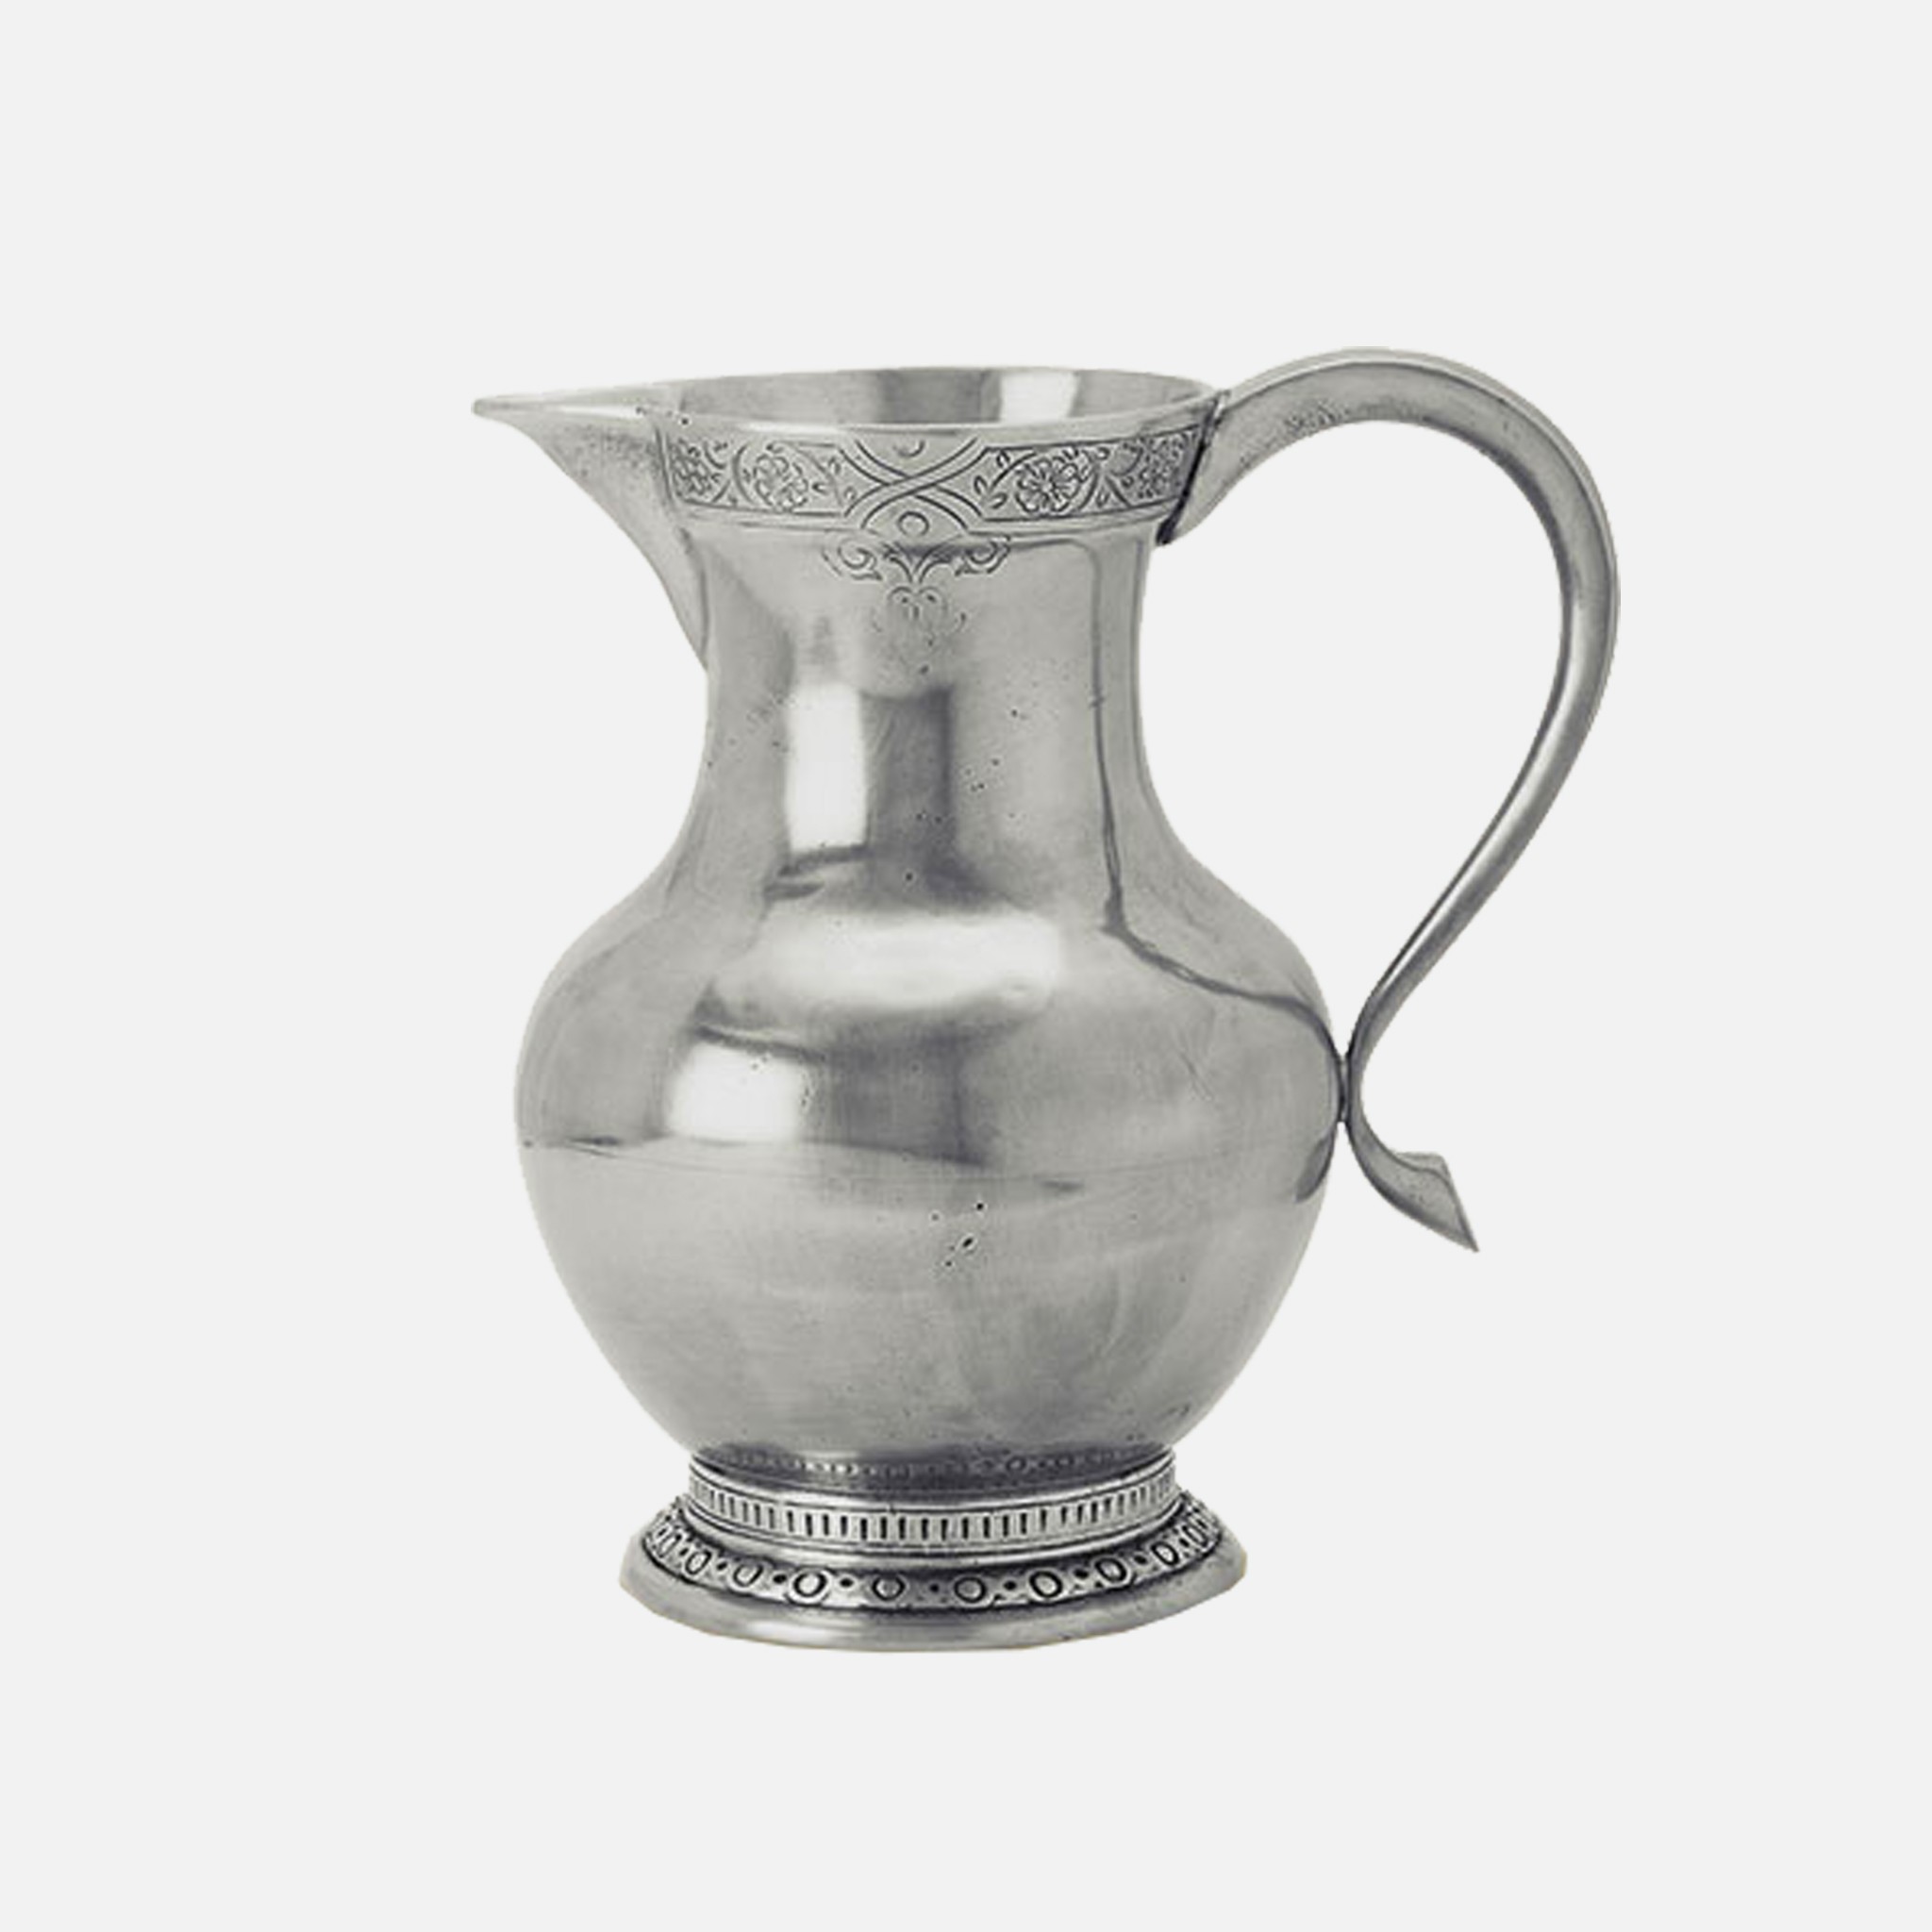 The image of an Match Pewter Engraved Pitcher product